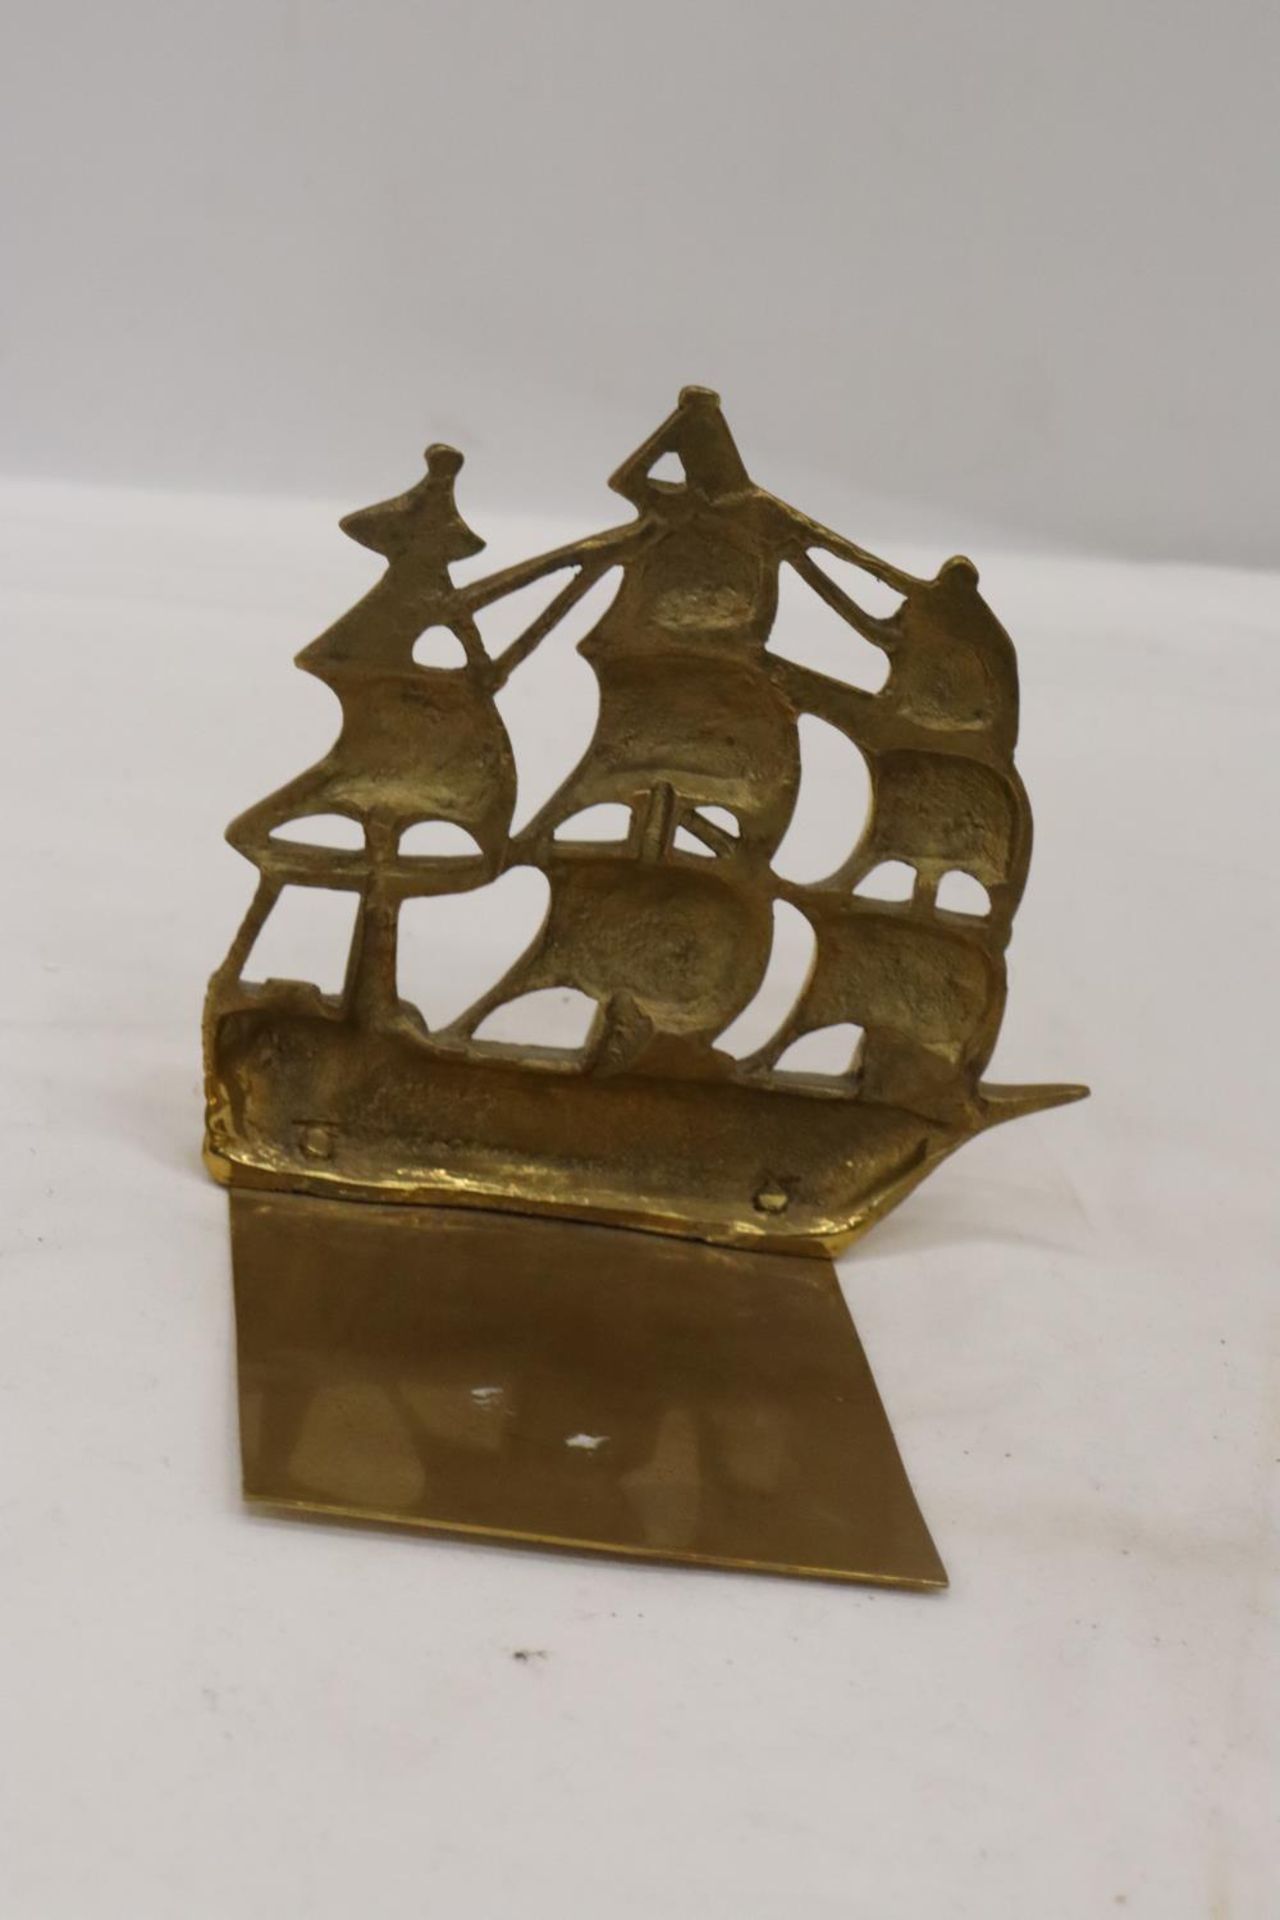 A PAIR OF VINTAGE BRASS SHIP BOOKENDS - Image 5 of 5